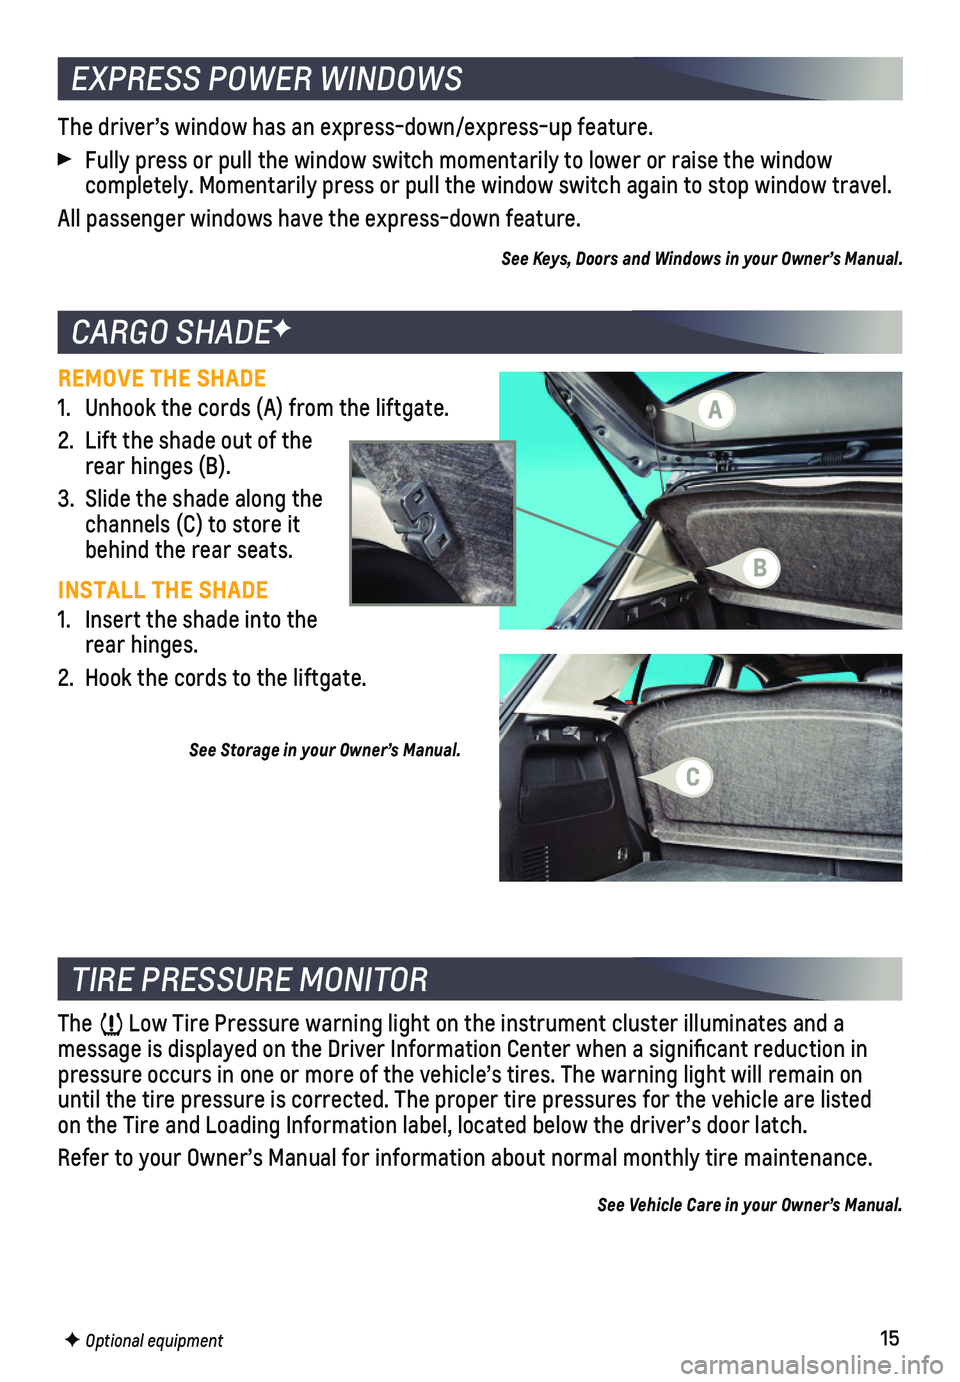 CHEVROLET TRAX 2021  Get To Know Guide 15
CARGO SHADEF
REMOVE THE SHADE
1. Unhook the cords (A) from the liftgate.
2. Lift the shade out of the rear hinges (B).
3. Slide the shade along the channels (C) to store it behind the rear seats.
I